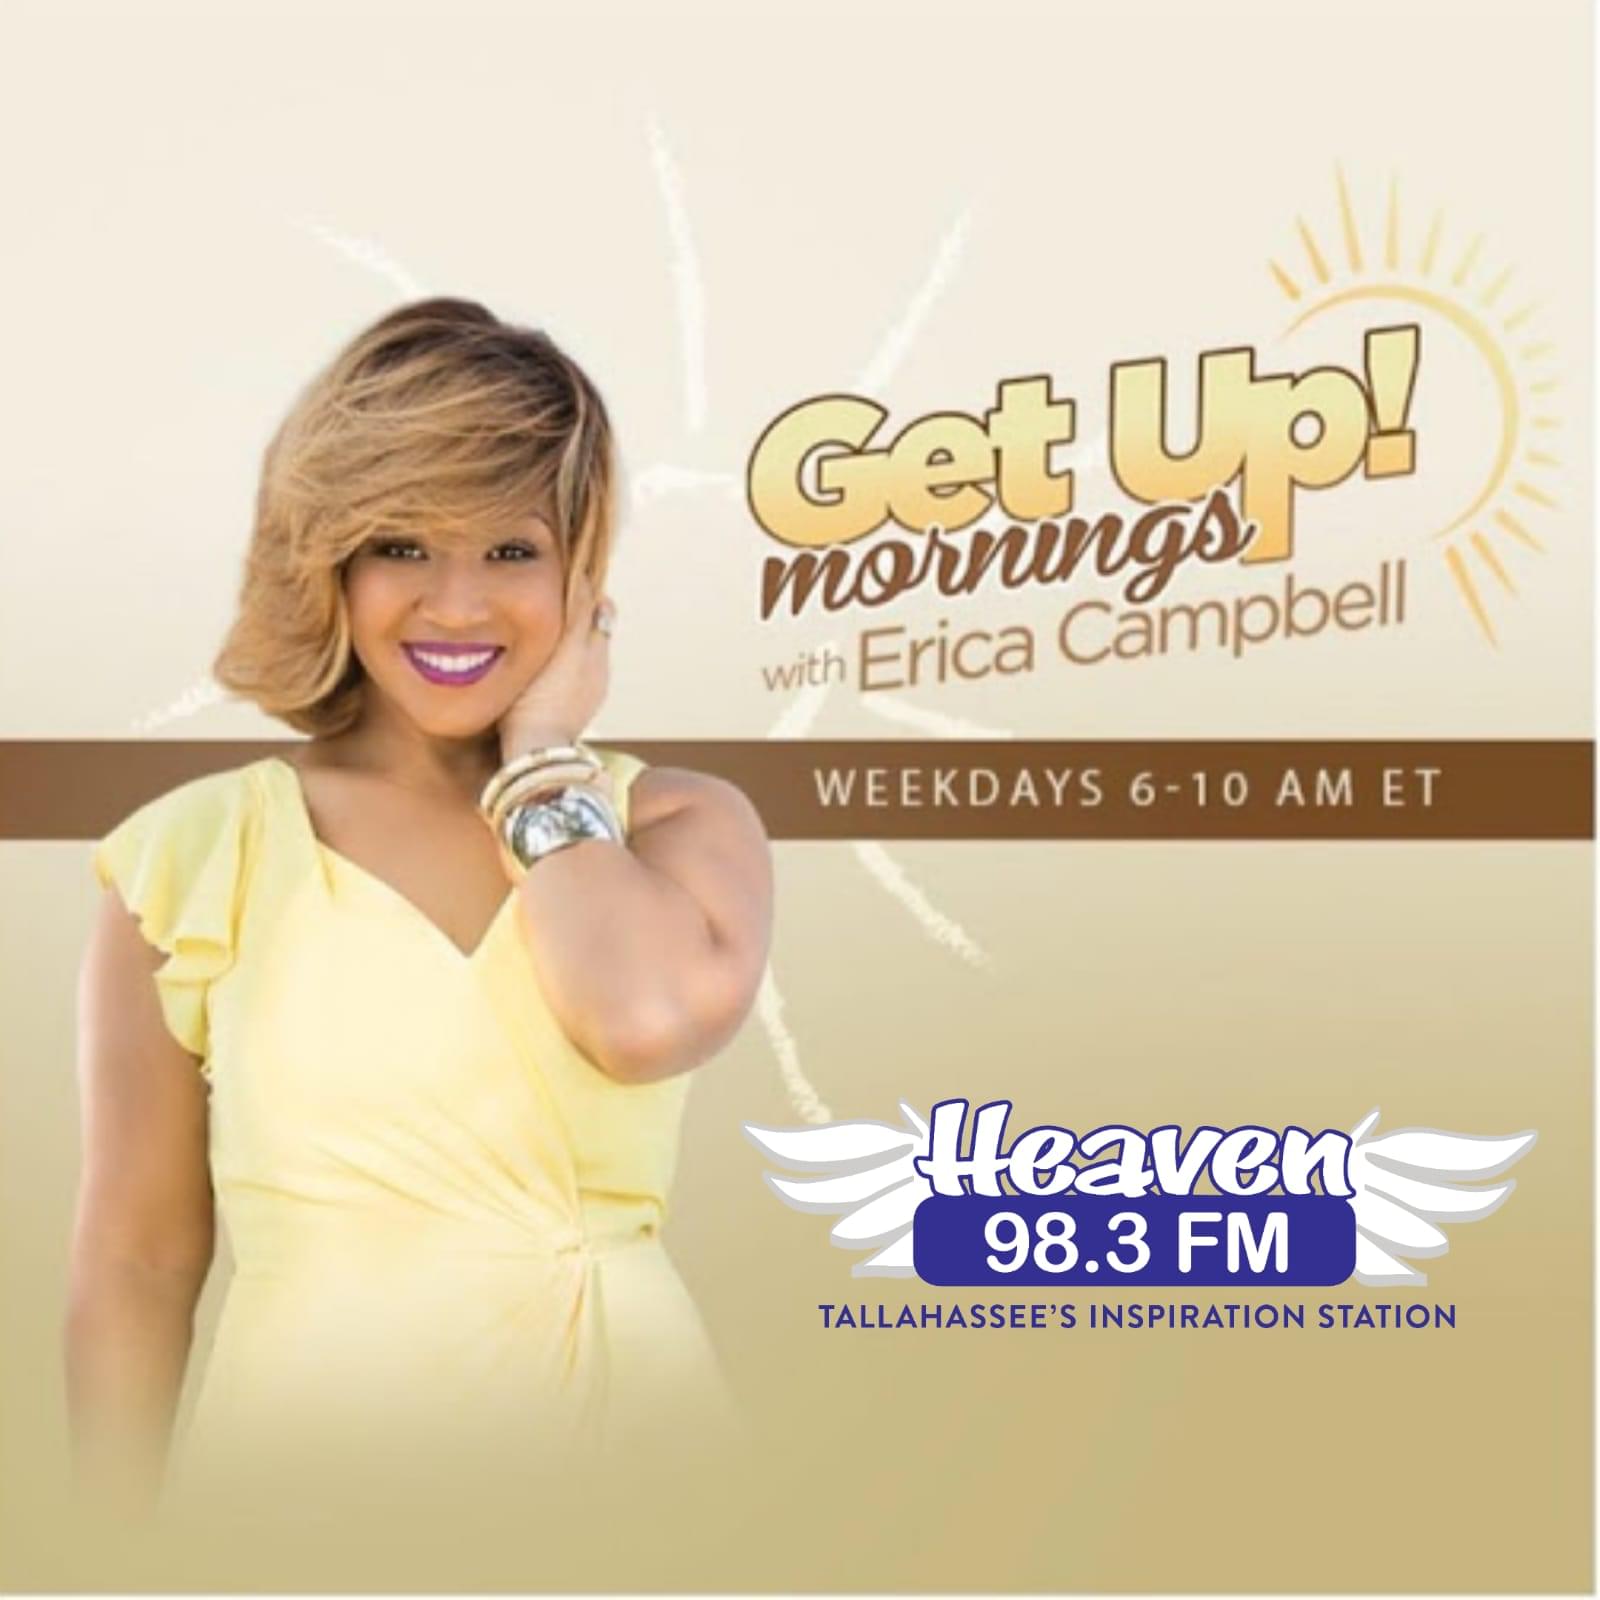 Get Up! Mornings with Erica Campbell